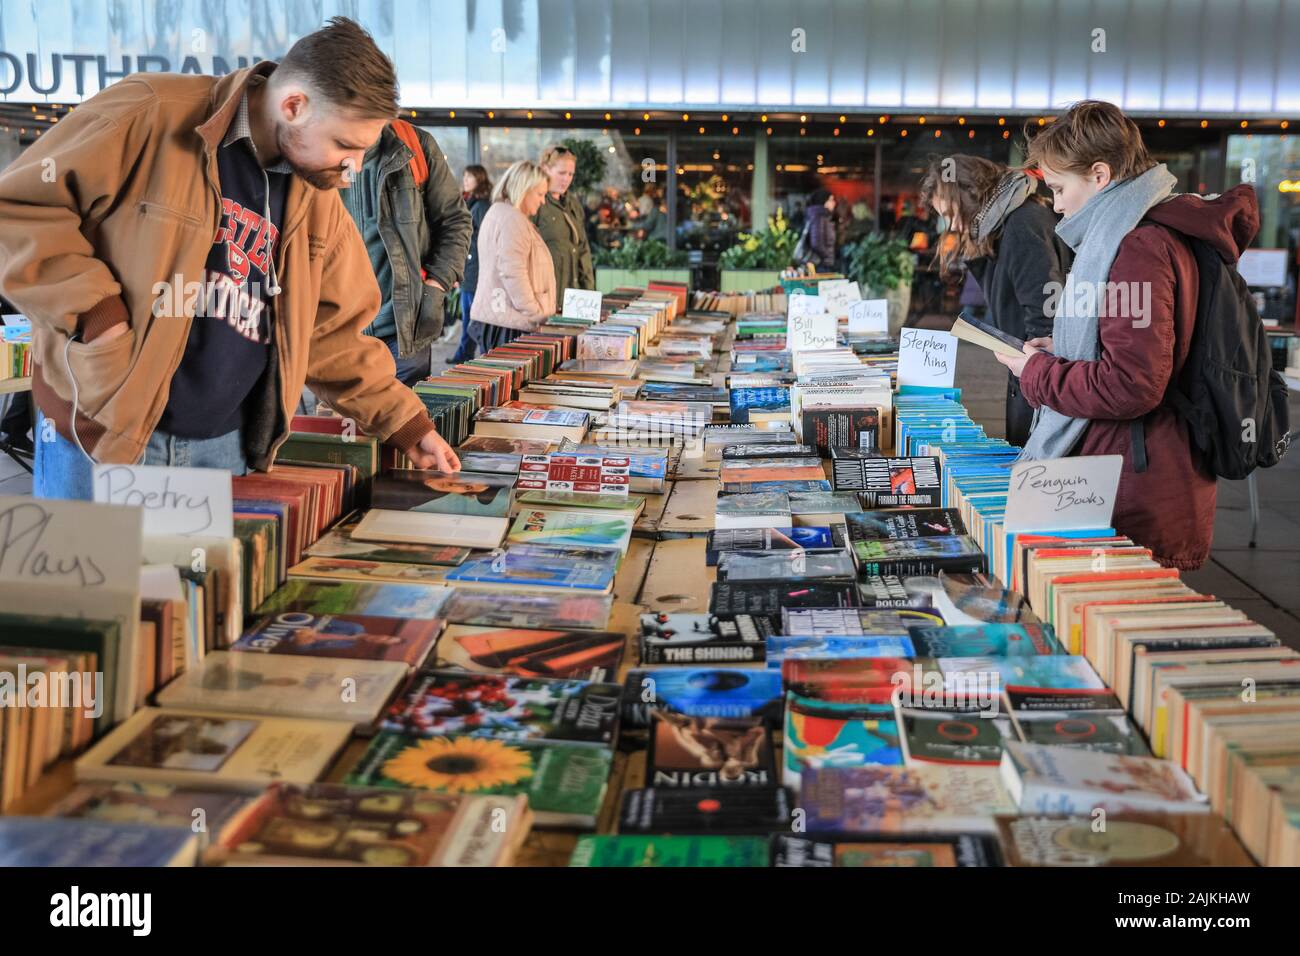 People browse at the Southbank Centre outdoor weekend book market, South Bank, London, UK Stock Photo